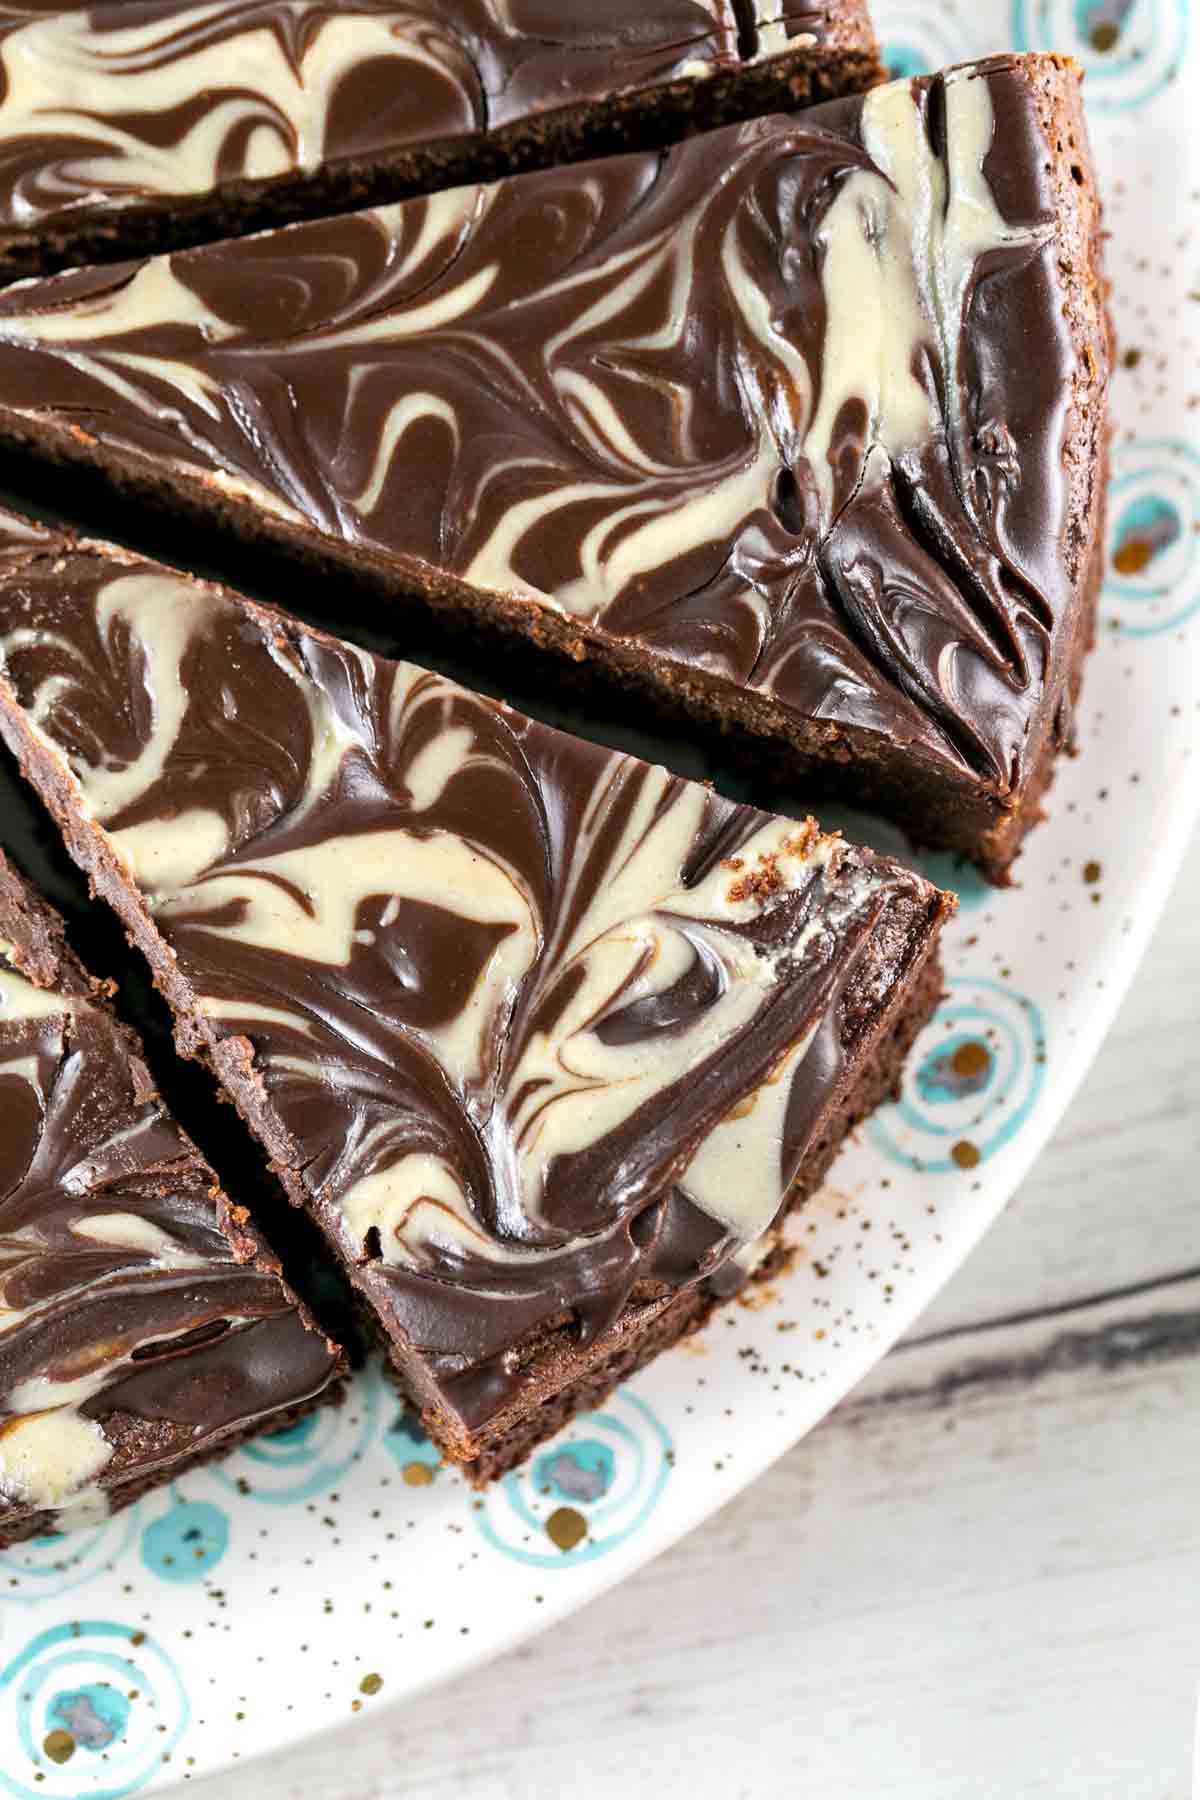 Flourless Chocolate Tahini Cake: Gluten free, Passover friendly, delicious all the time. A rich, decadent flourless chocolate cake with swirls of tahini make an easy, elegant cake. {Bunsen Burner Bakery} #glutenfree #passover #tahini #cake